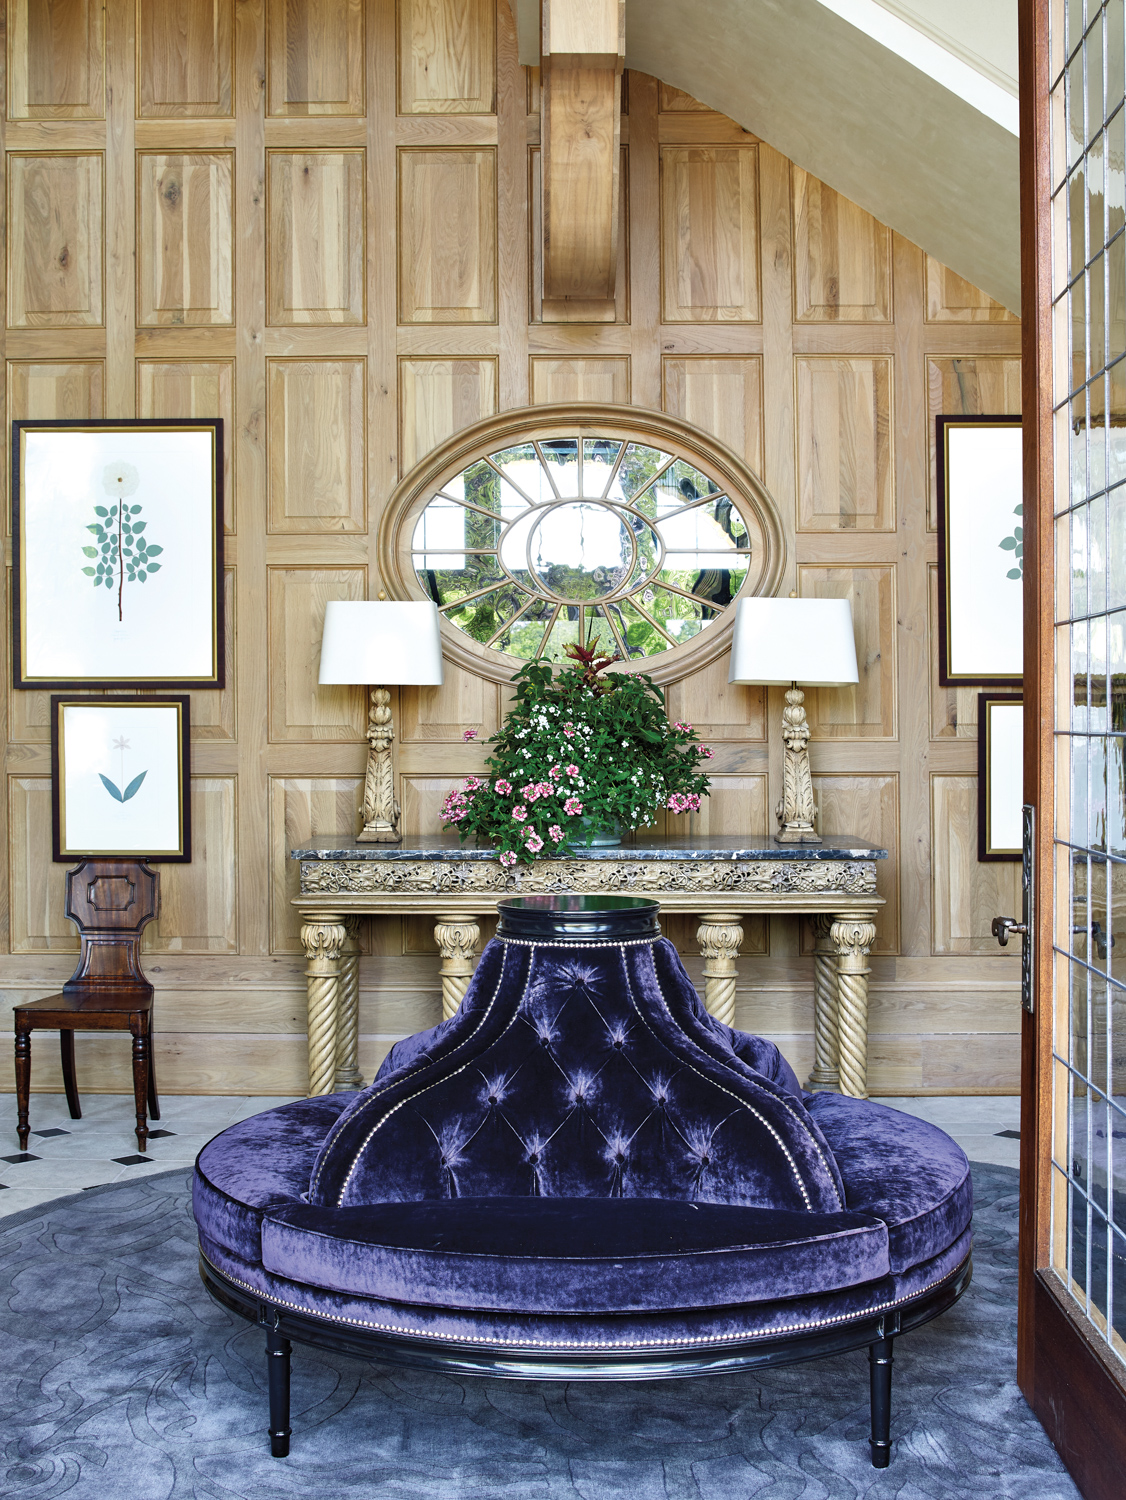 Entryway with paneled walls, round...